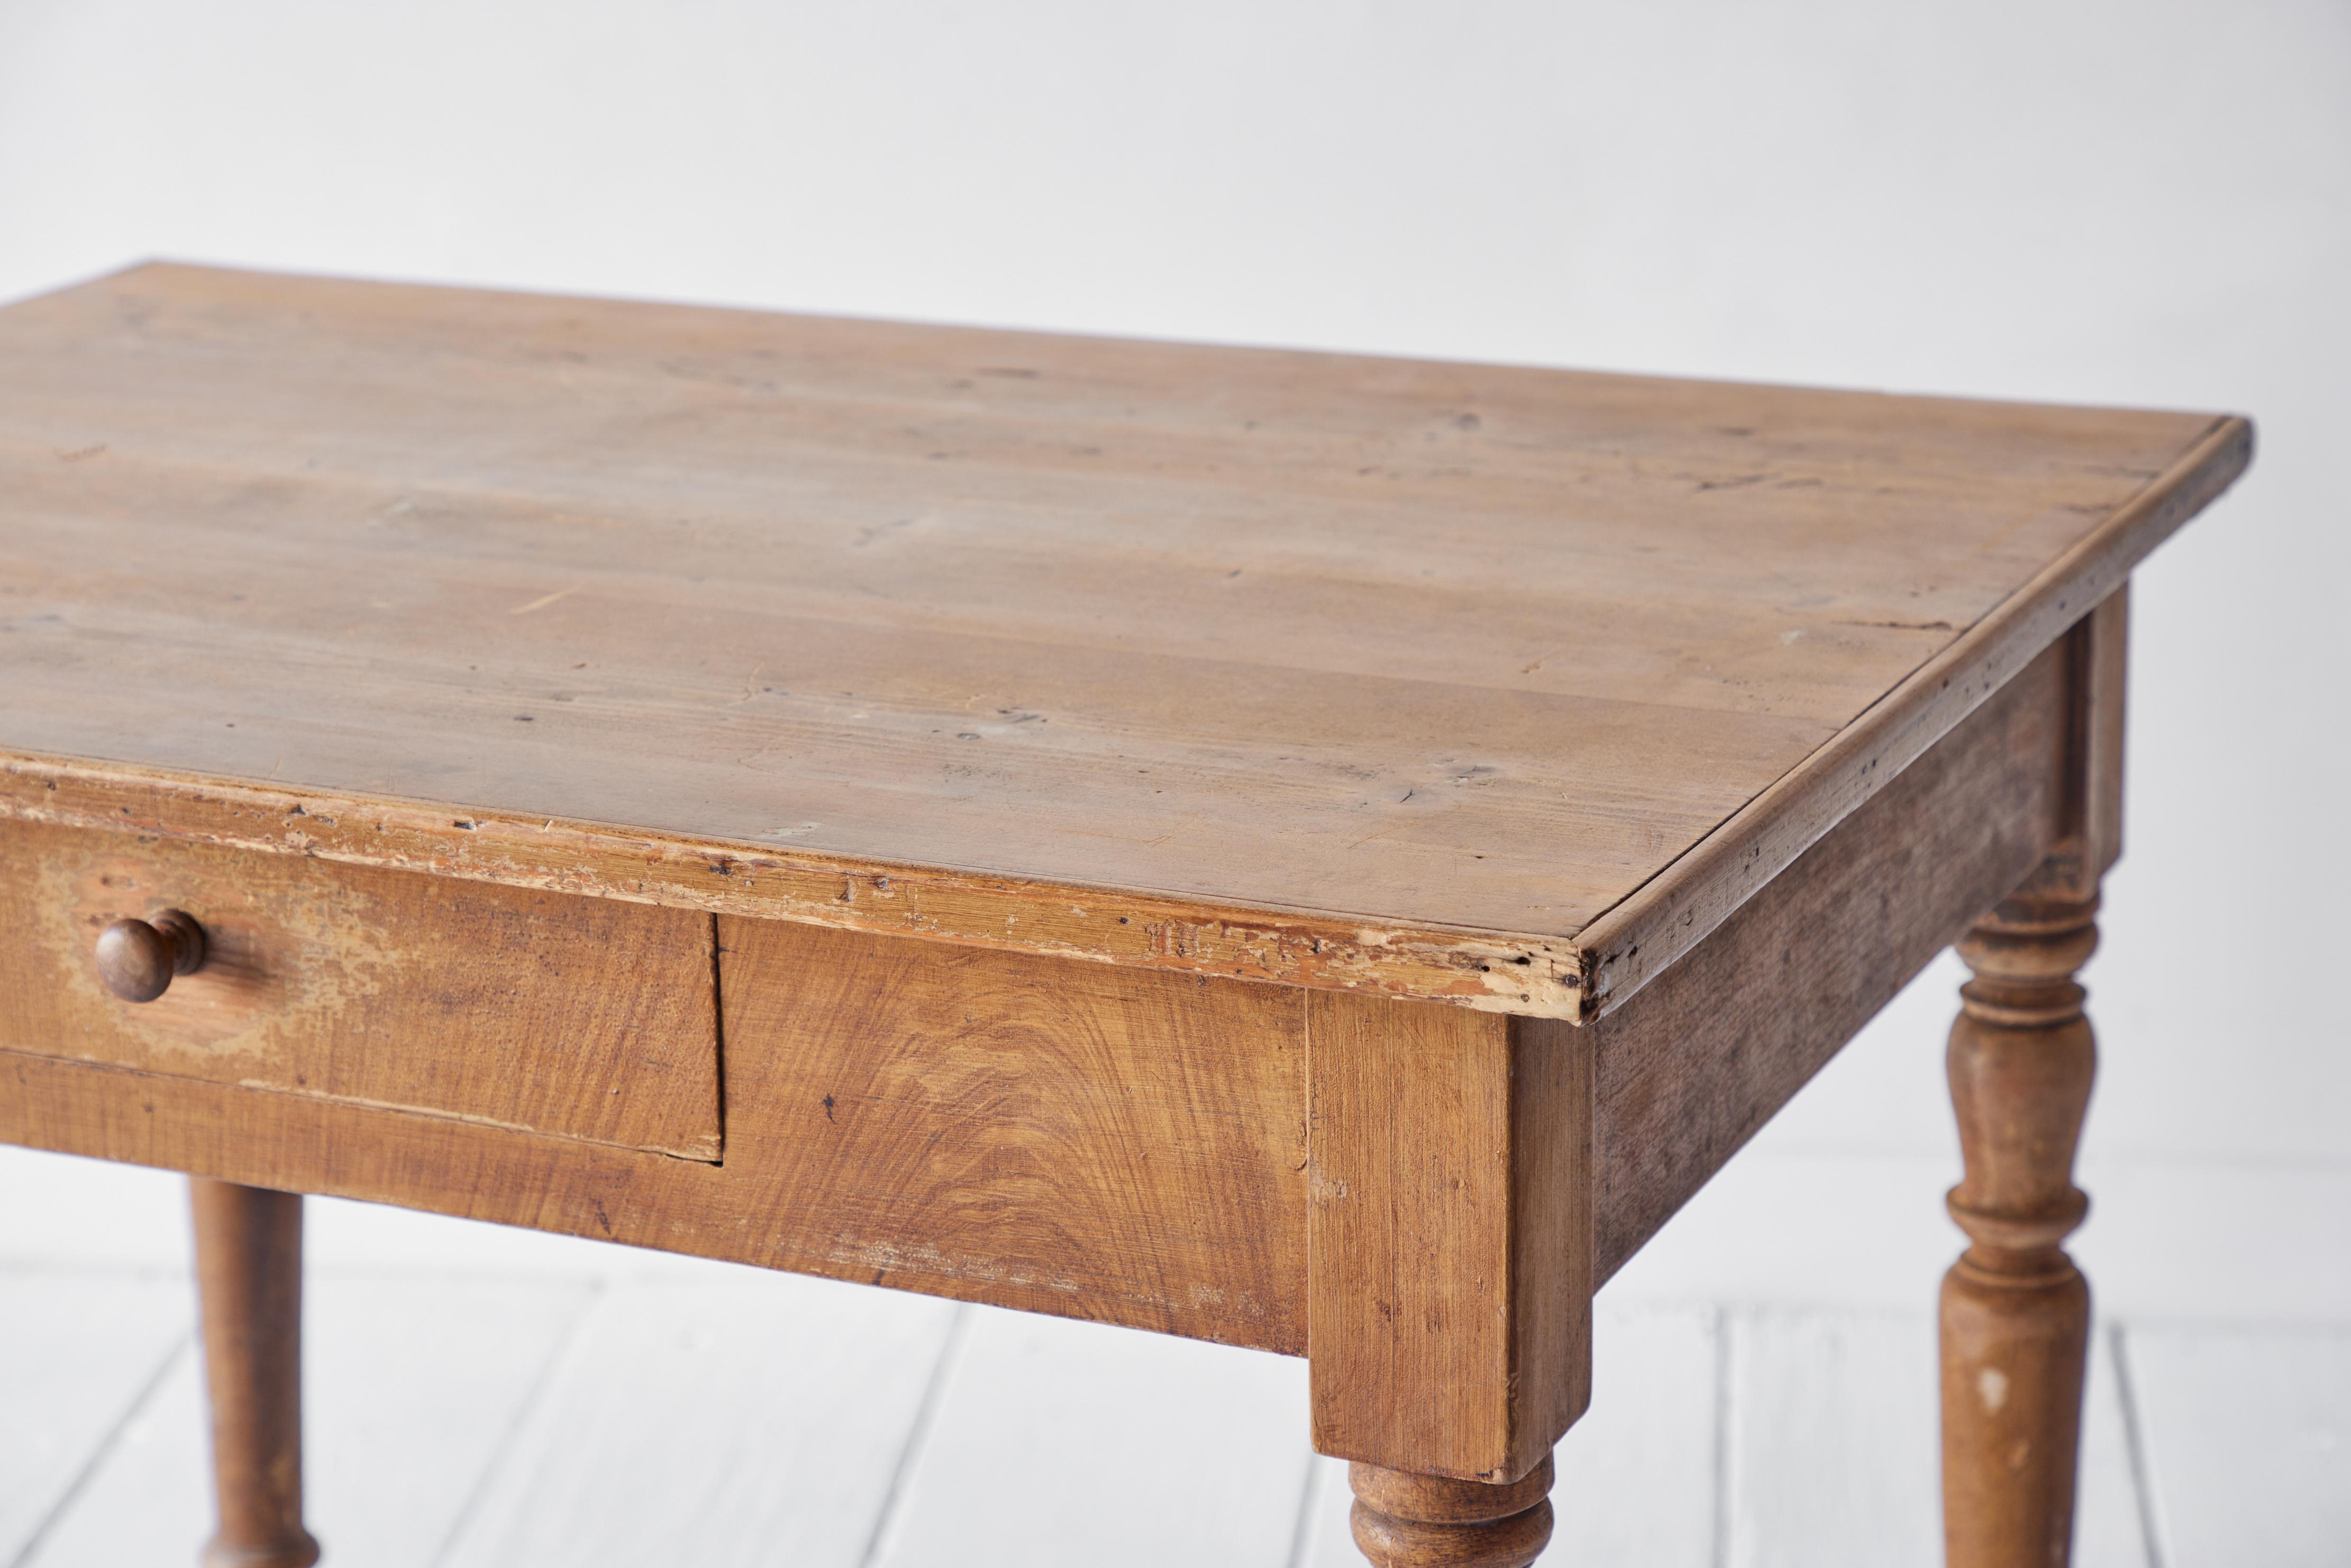 Rustic Early American Table with Single Drawer 1